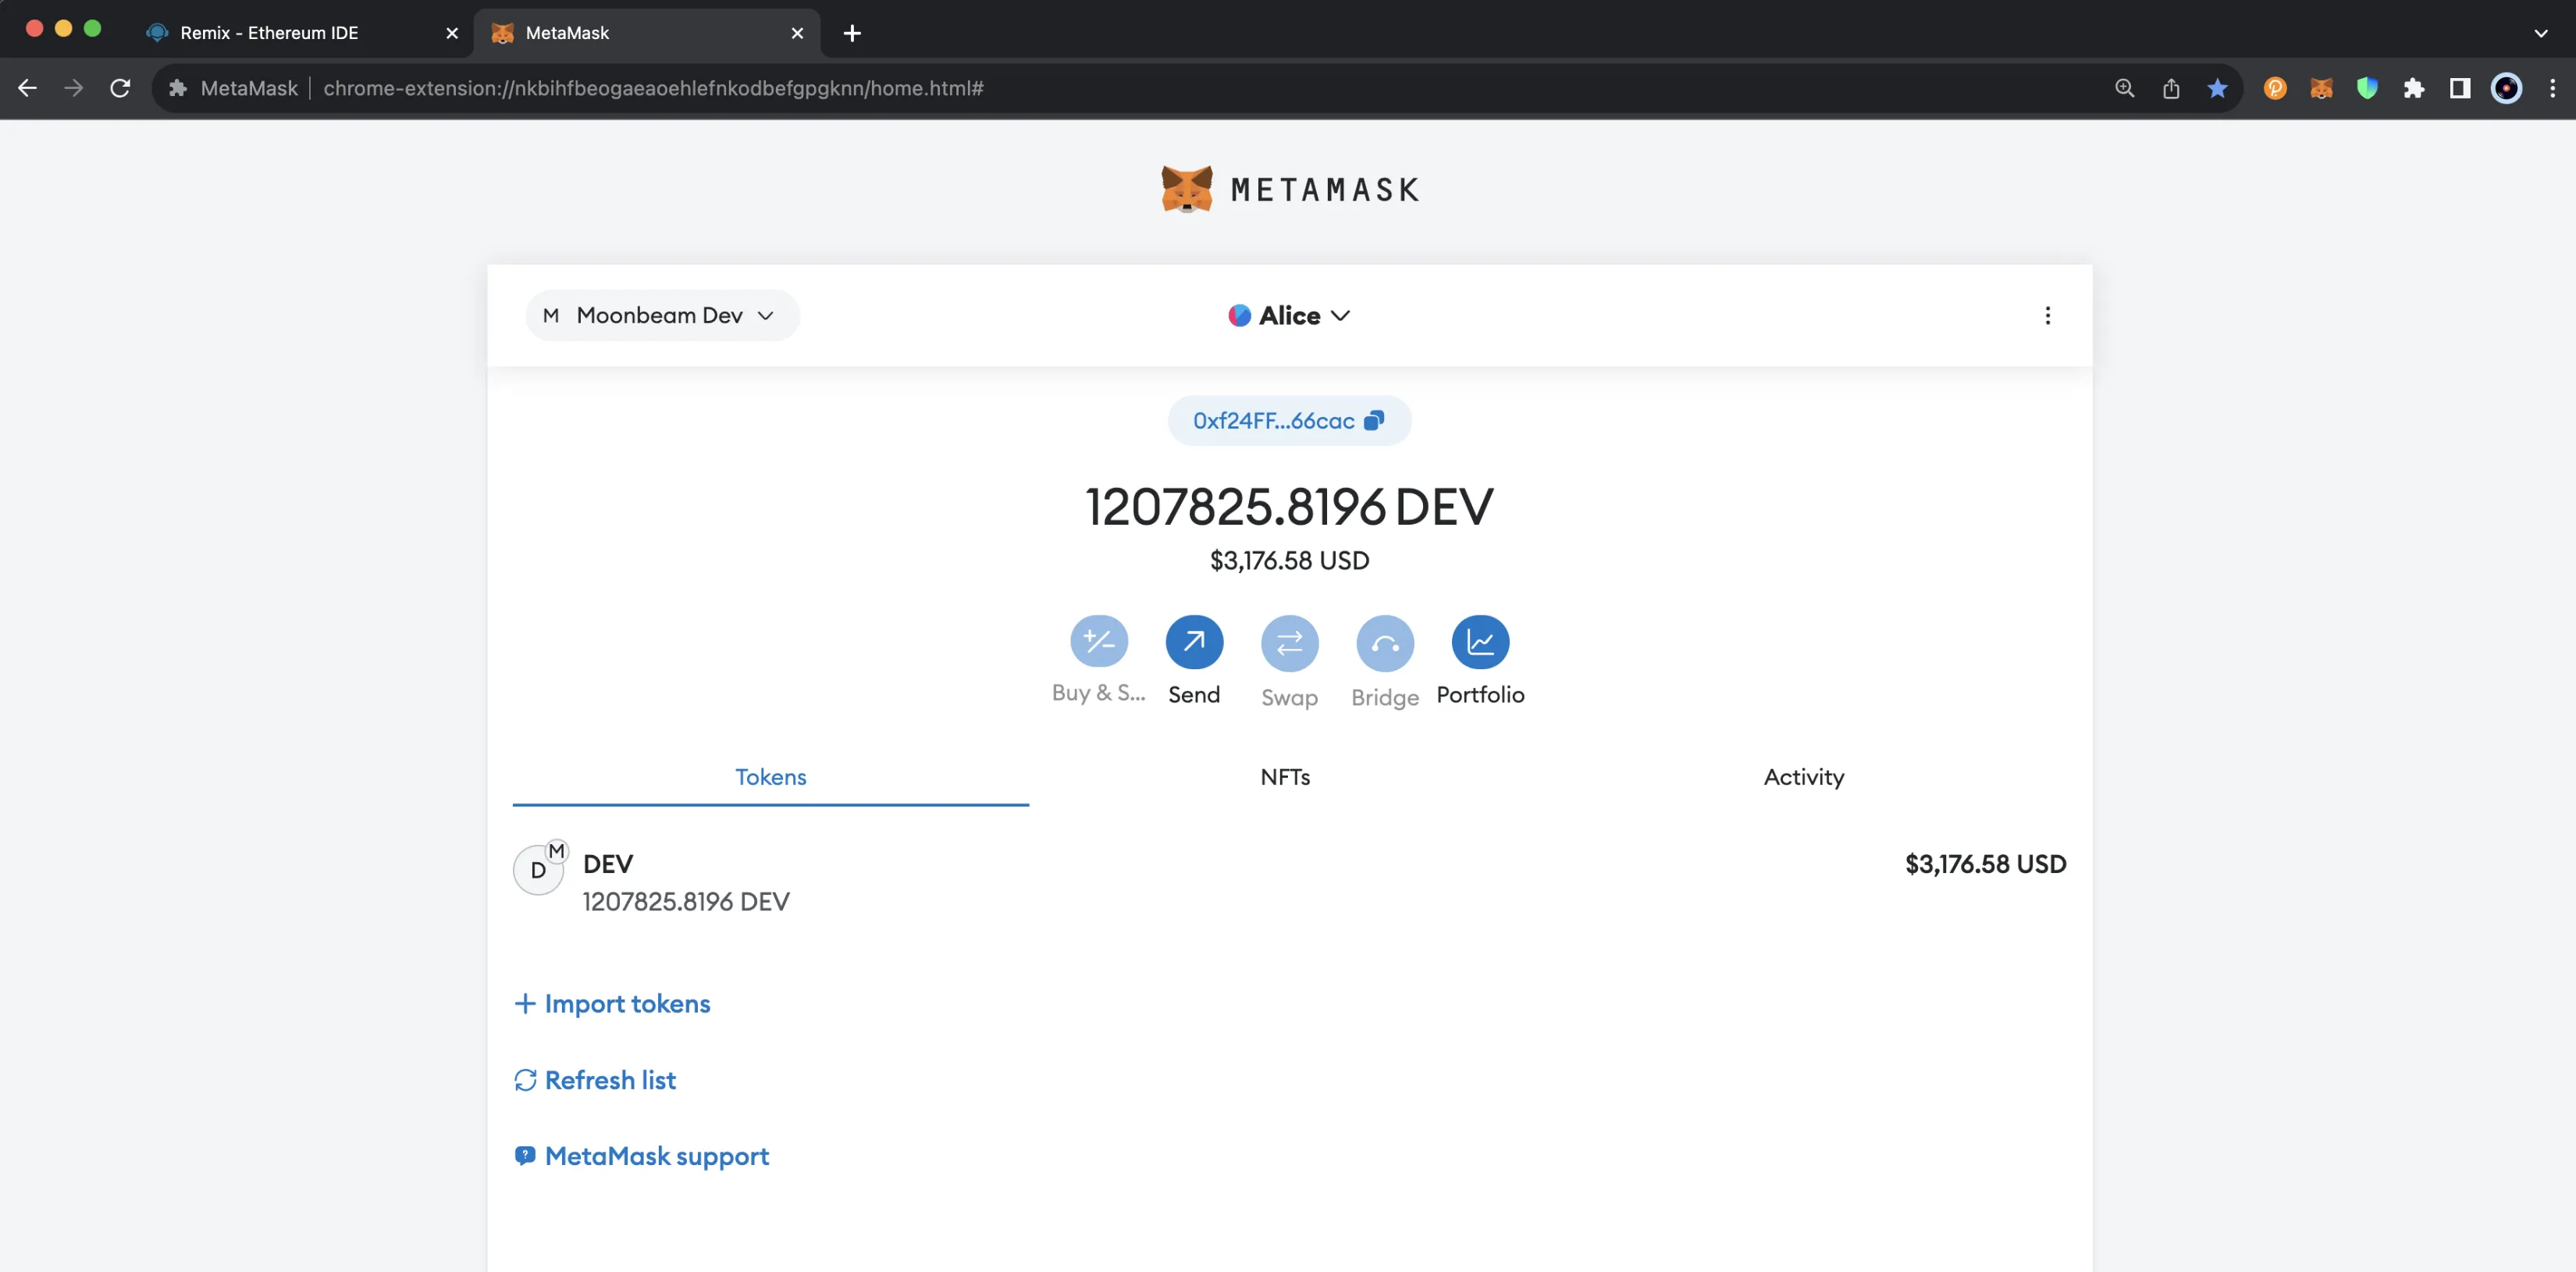 The main screen of MetaMask, which shows an account connected to a Moonbeam development node and its balance.